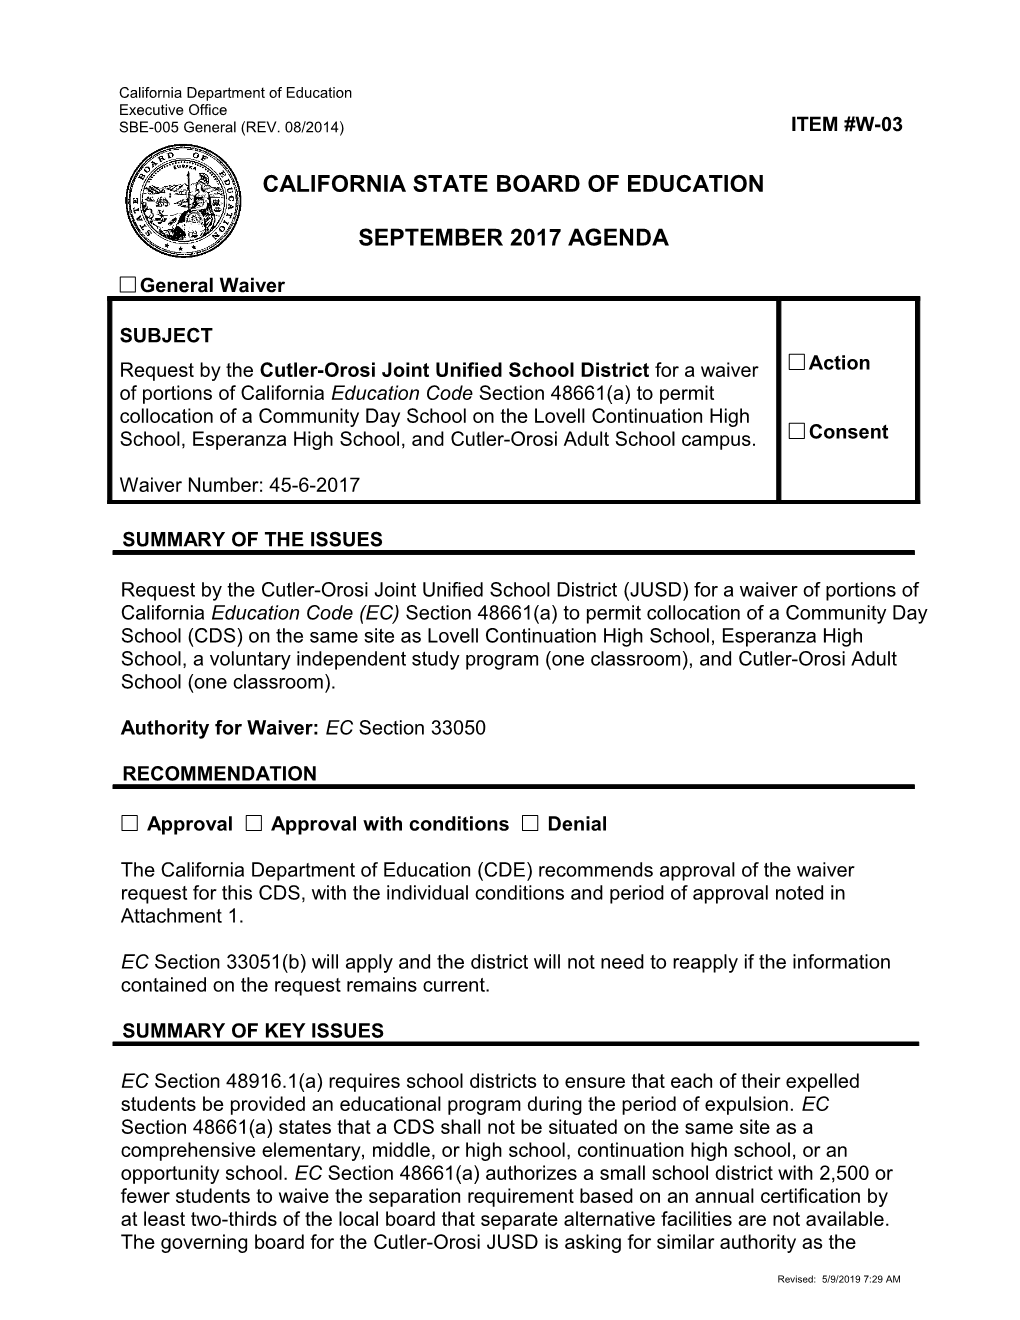 September 2017 Waiver Item W-03 - Meeting Agendas (CA State Board of Education)